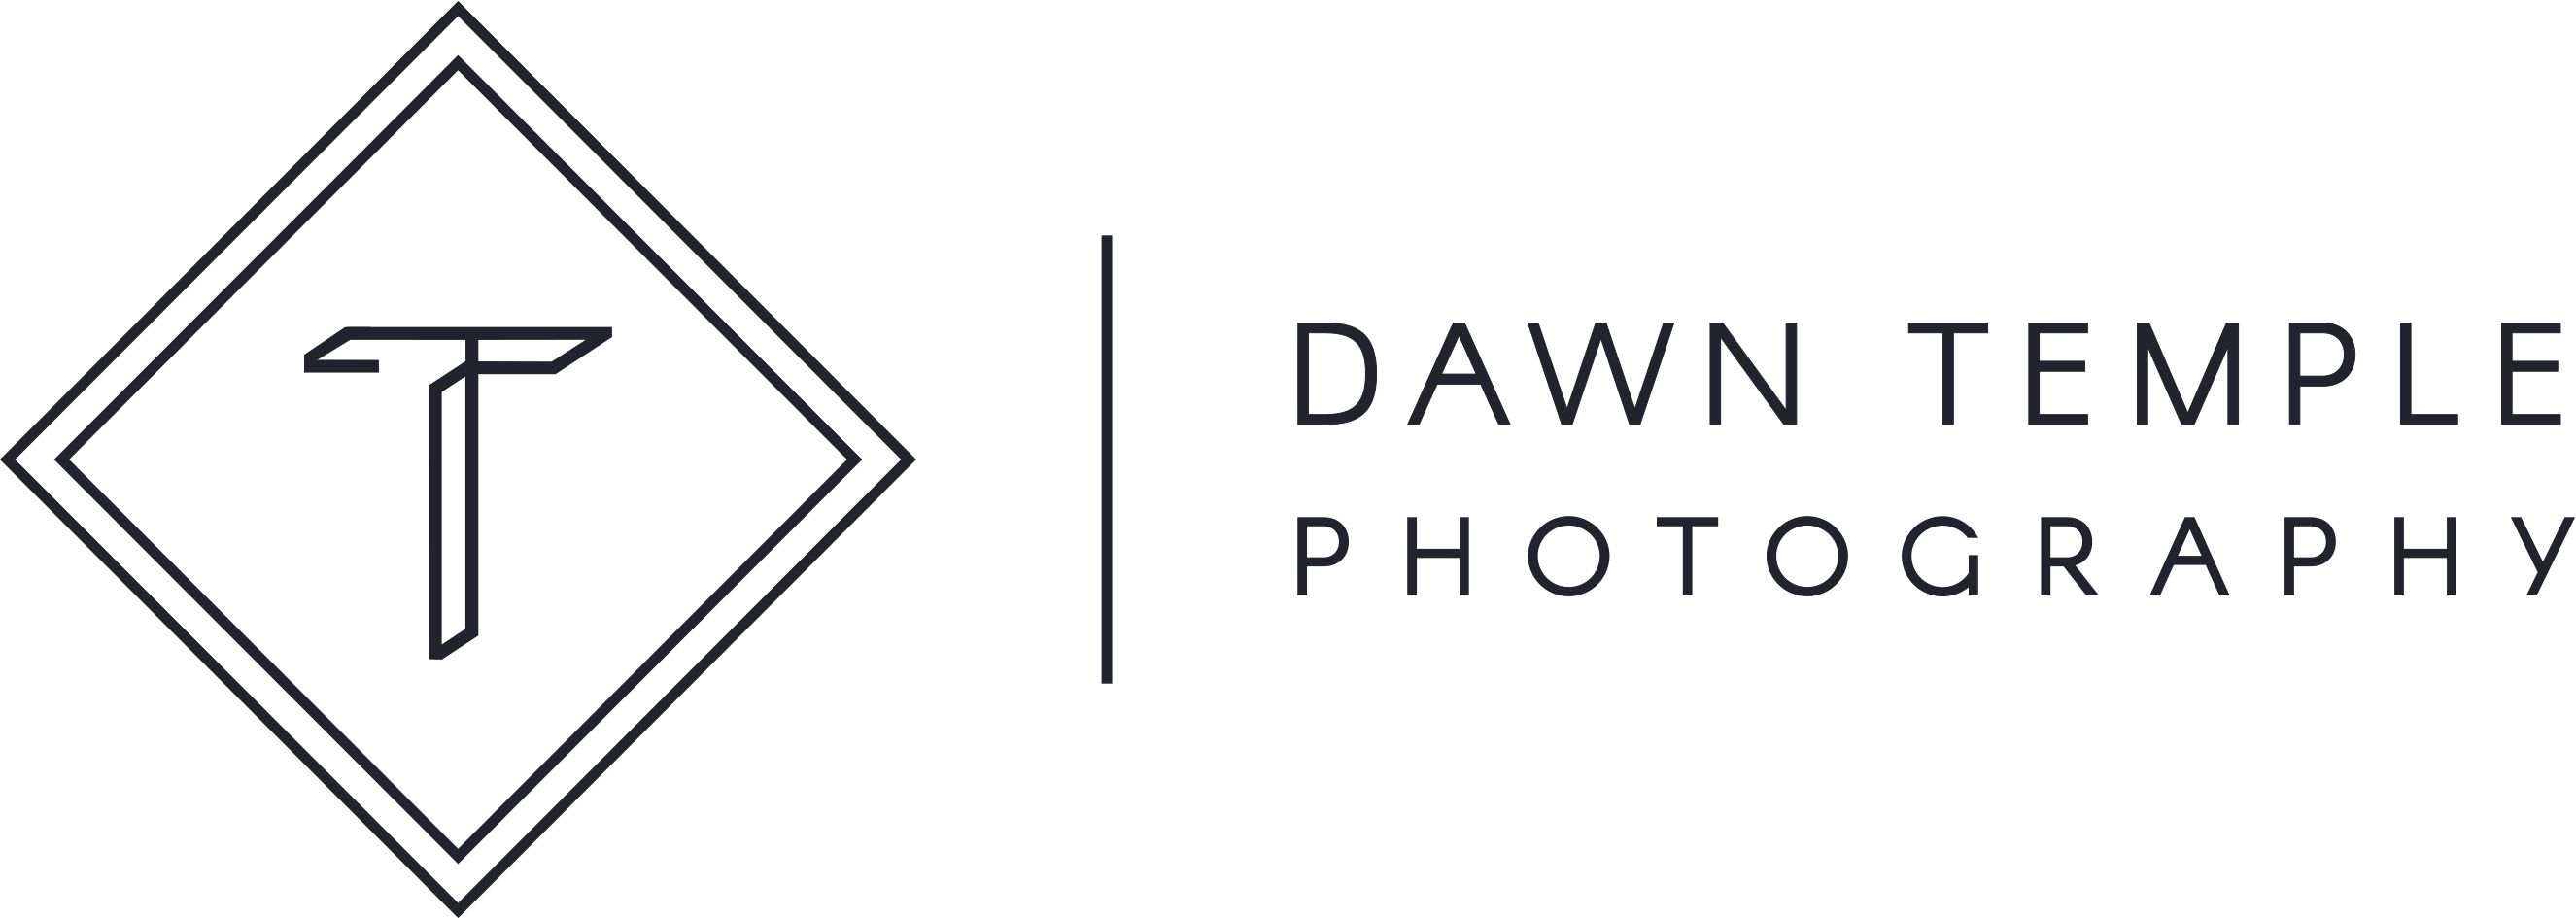 Dawn Temple Photography